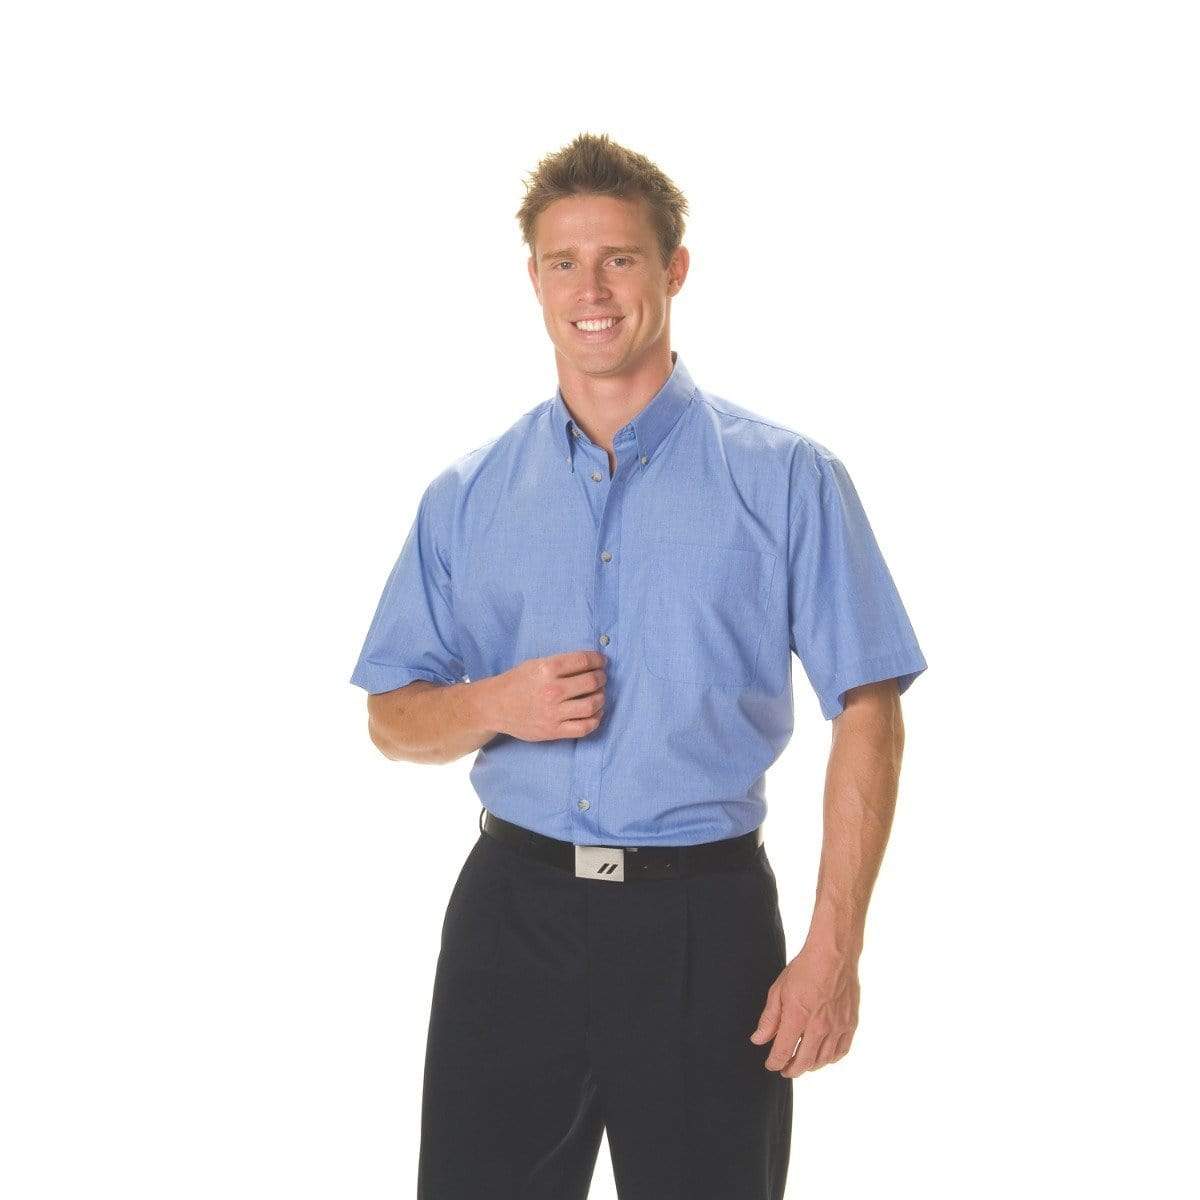 Dnc Workwear Polyester Cotton Chambray Short Sleeve Business Shirt - 4121 Work Wear DNC Workwear Chambray S 